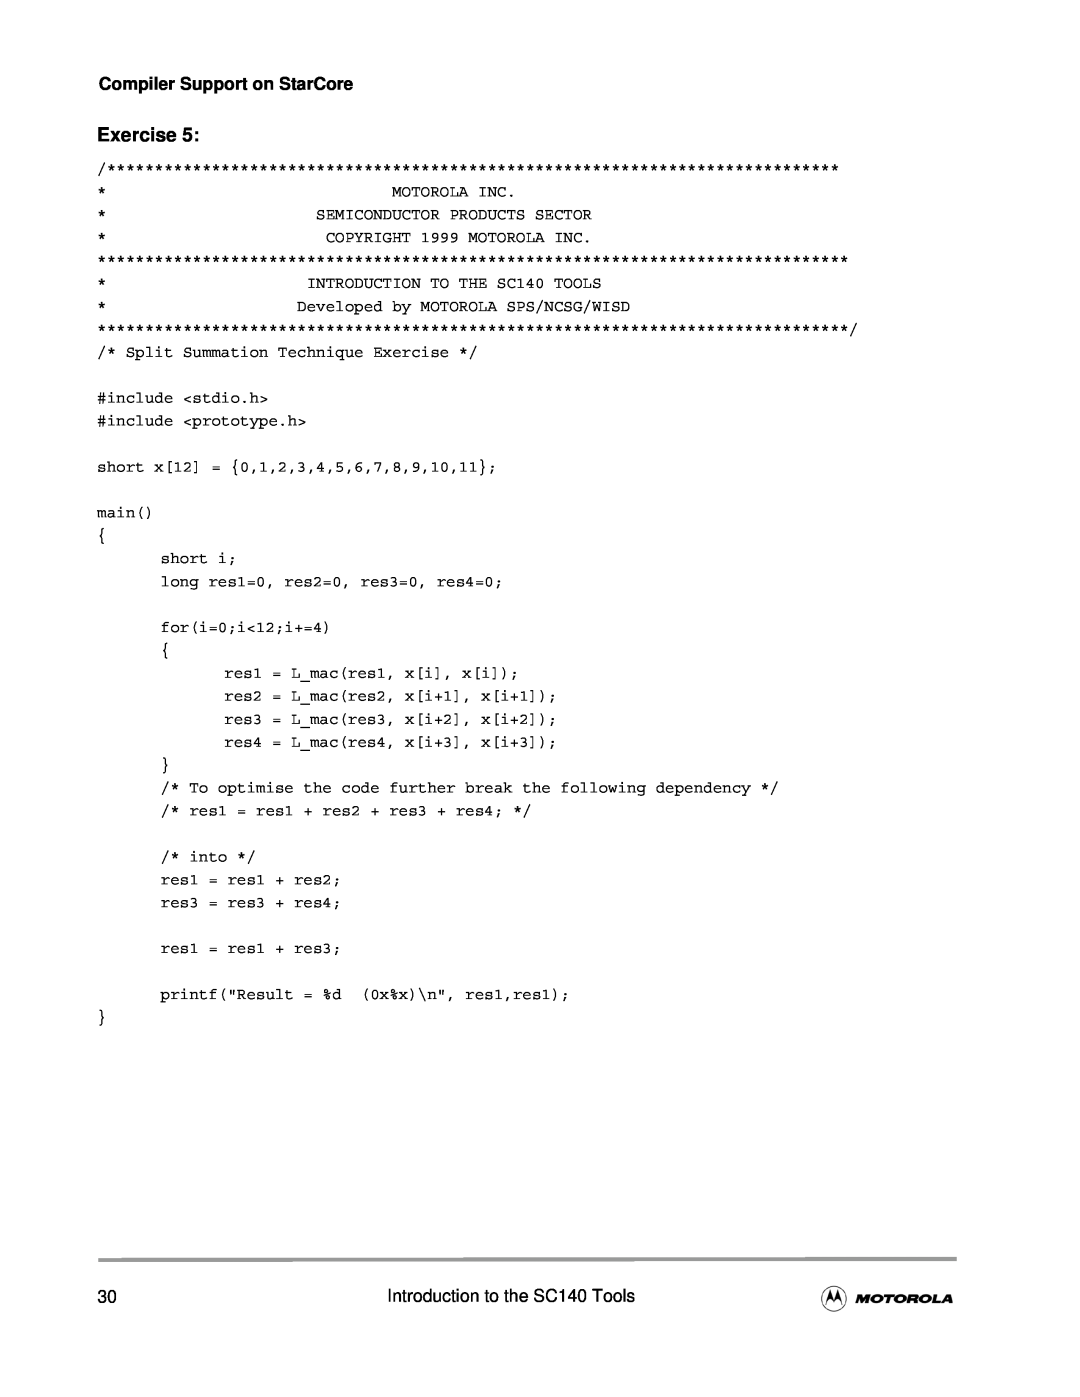 Motorola user manual Compiler Support on StarCore, Introduction to the SC140 Tools 